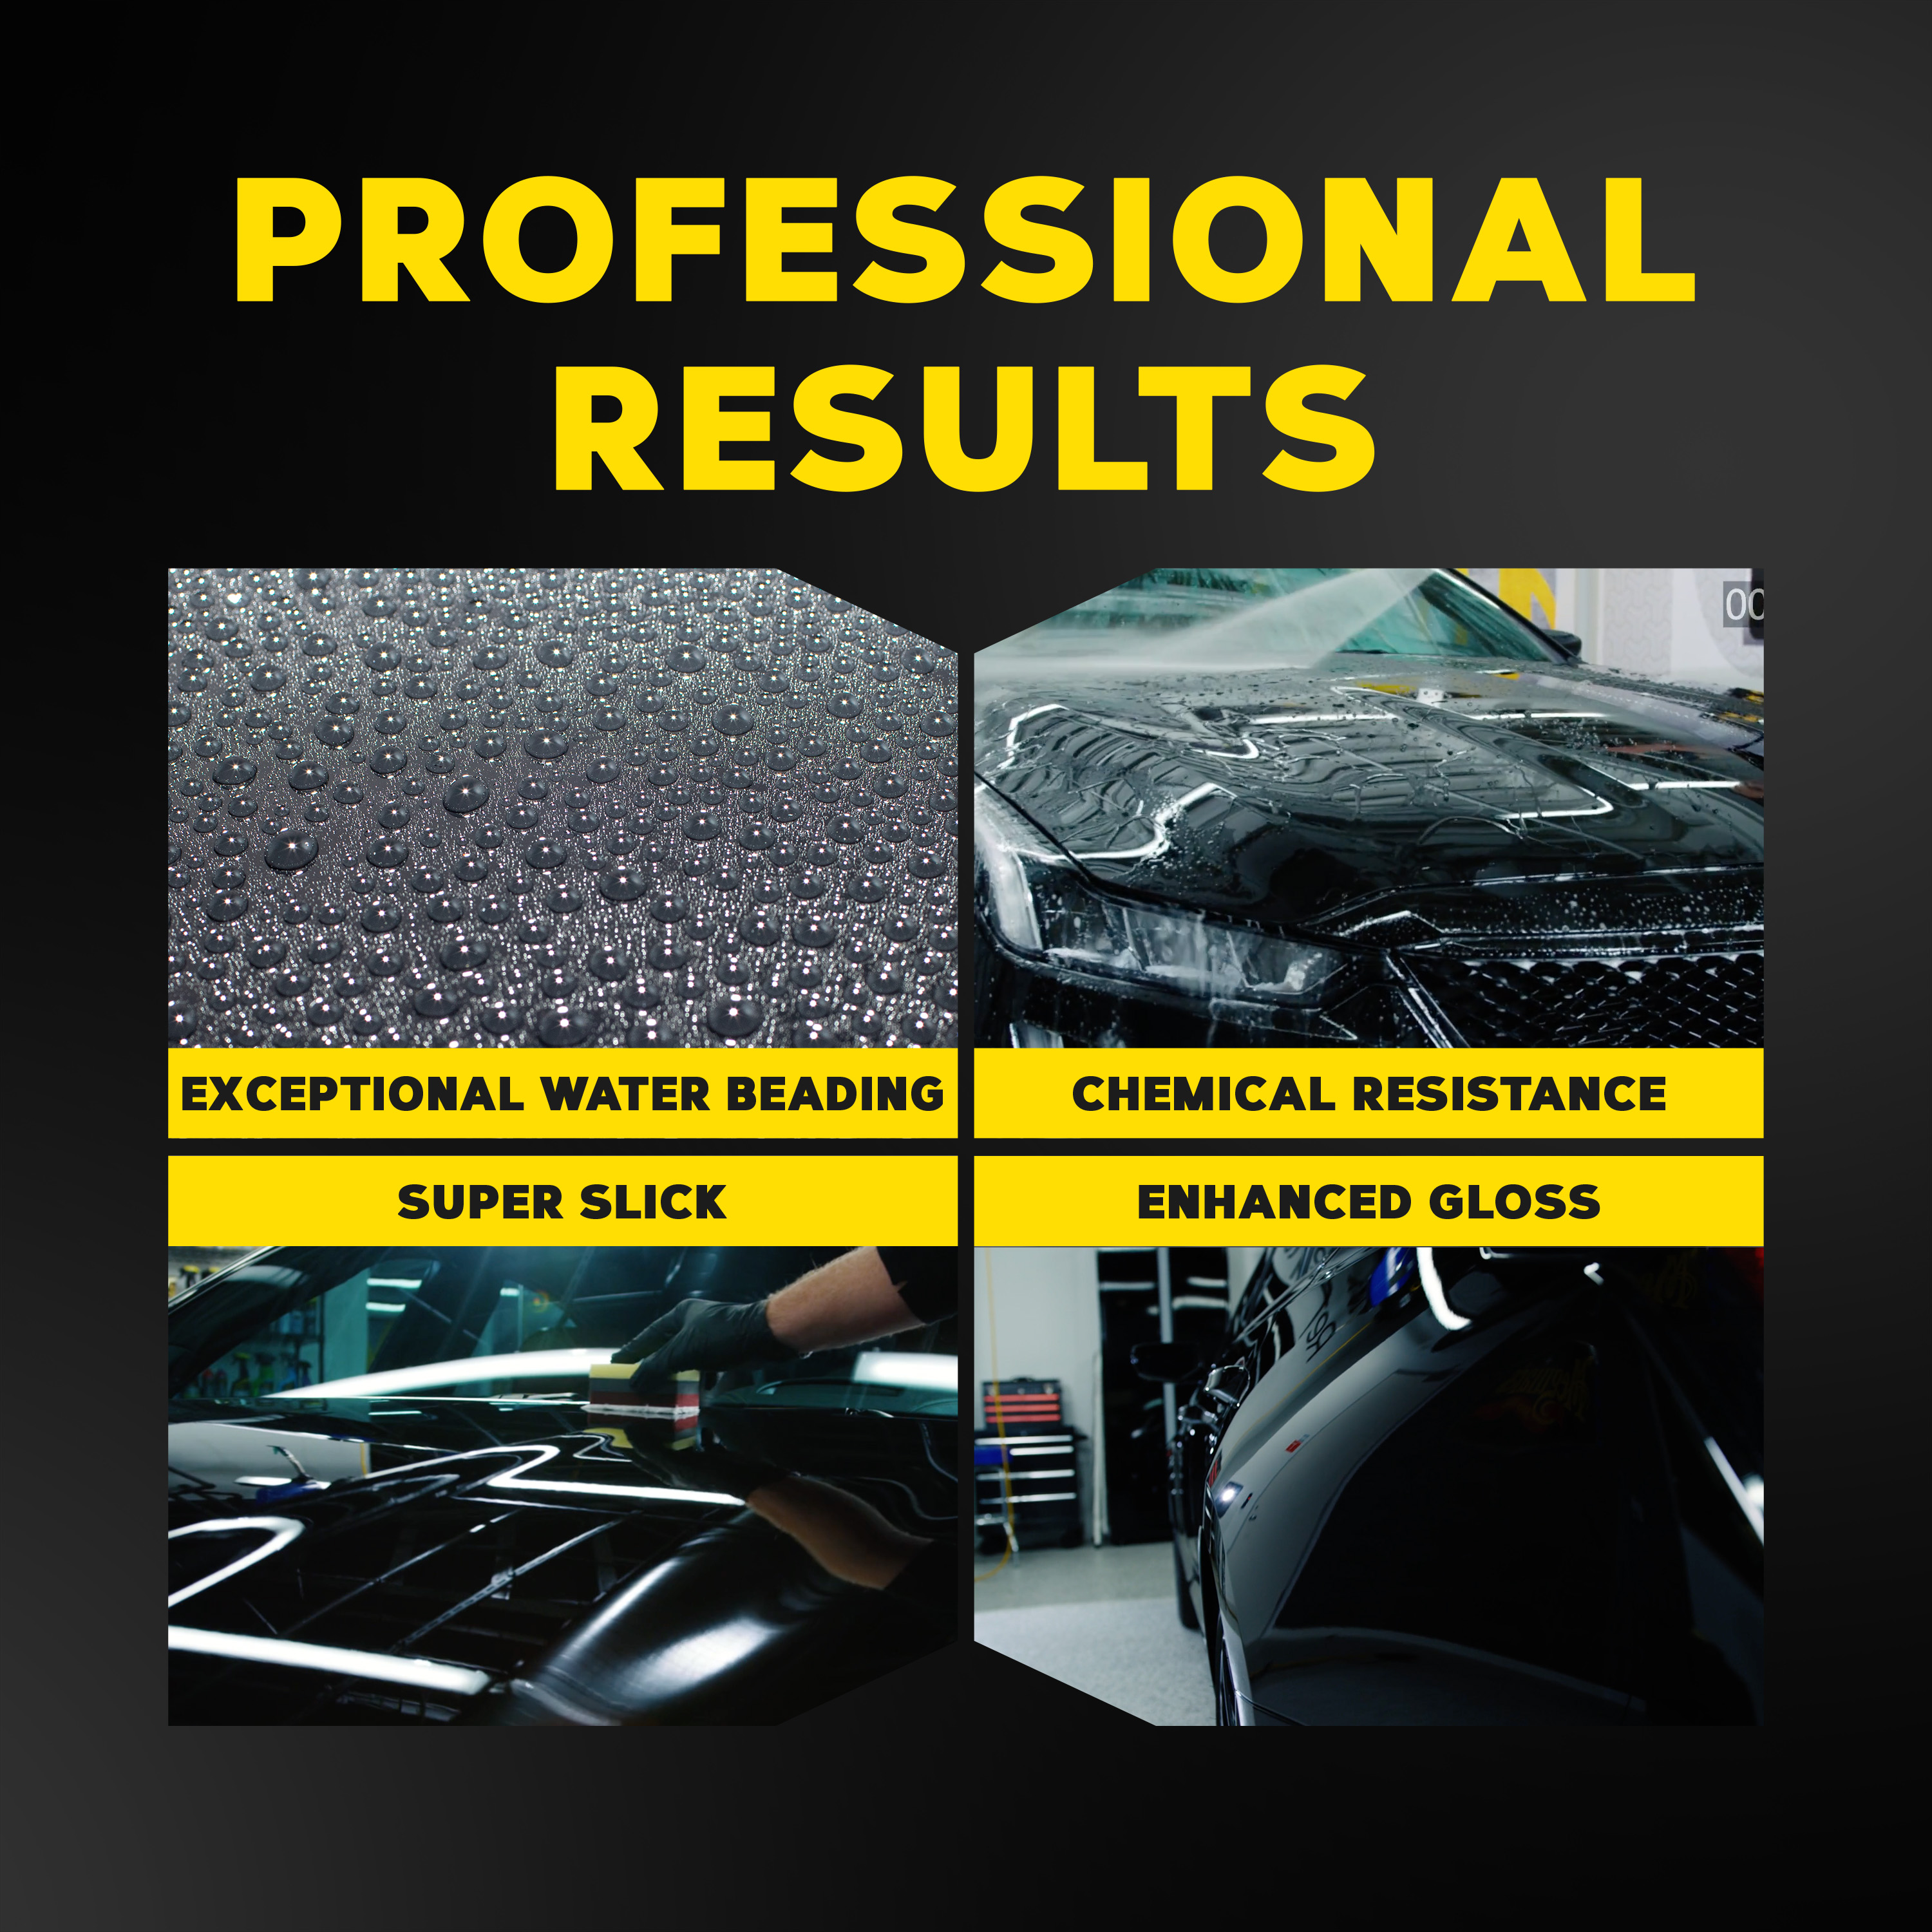 Ceramic windshield coatings -- how to get the MOST PERFORMANCE & DURABILITY  from your coating 